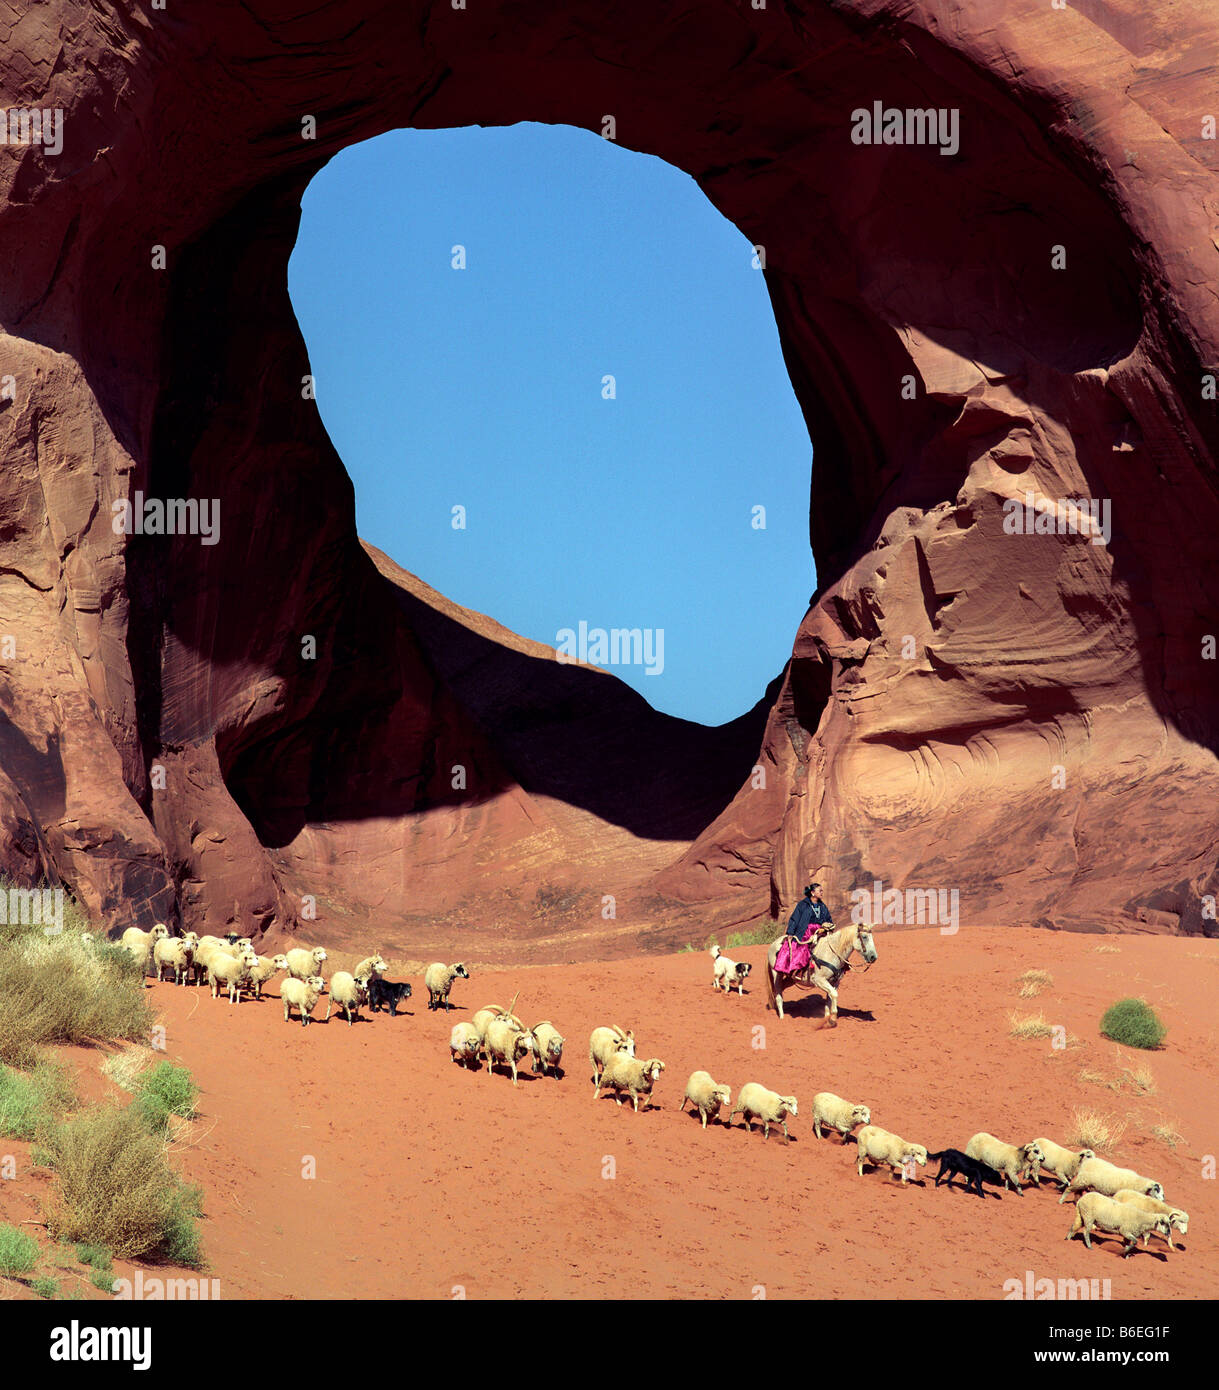 Navajo Woman herding sheep at the Ear of the Wind in Monument Valley Stock Photo